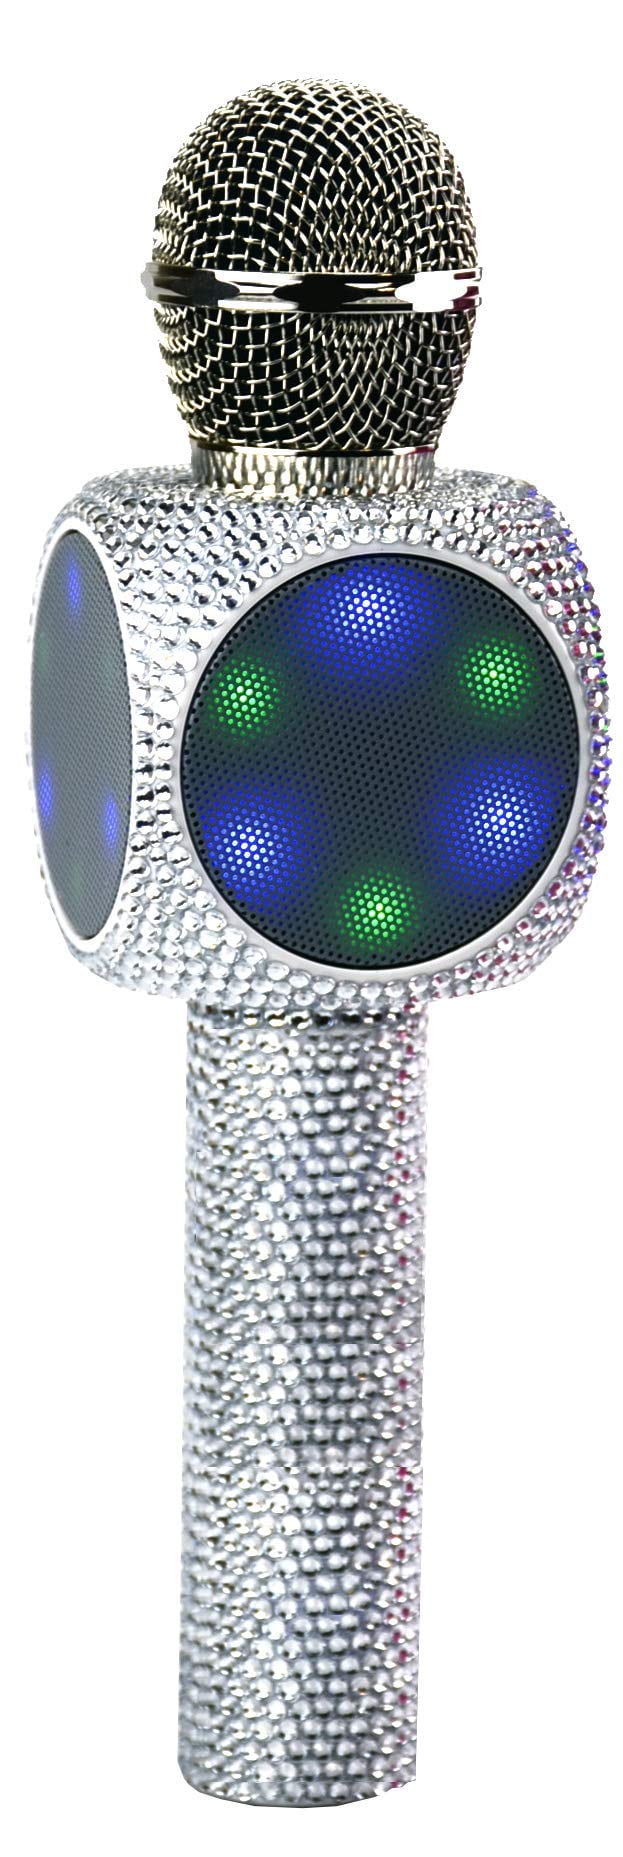 Iridescent Bling Bundle Sing-along Iridescent Bling Karaoke Microphone & Bluetooth Speaker All-in-one w/USB Disco Ball 